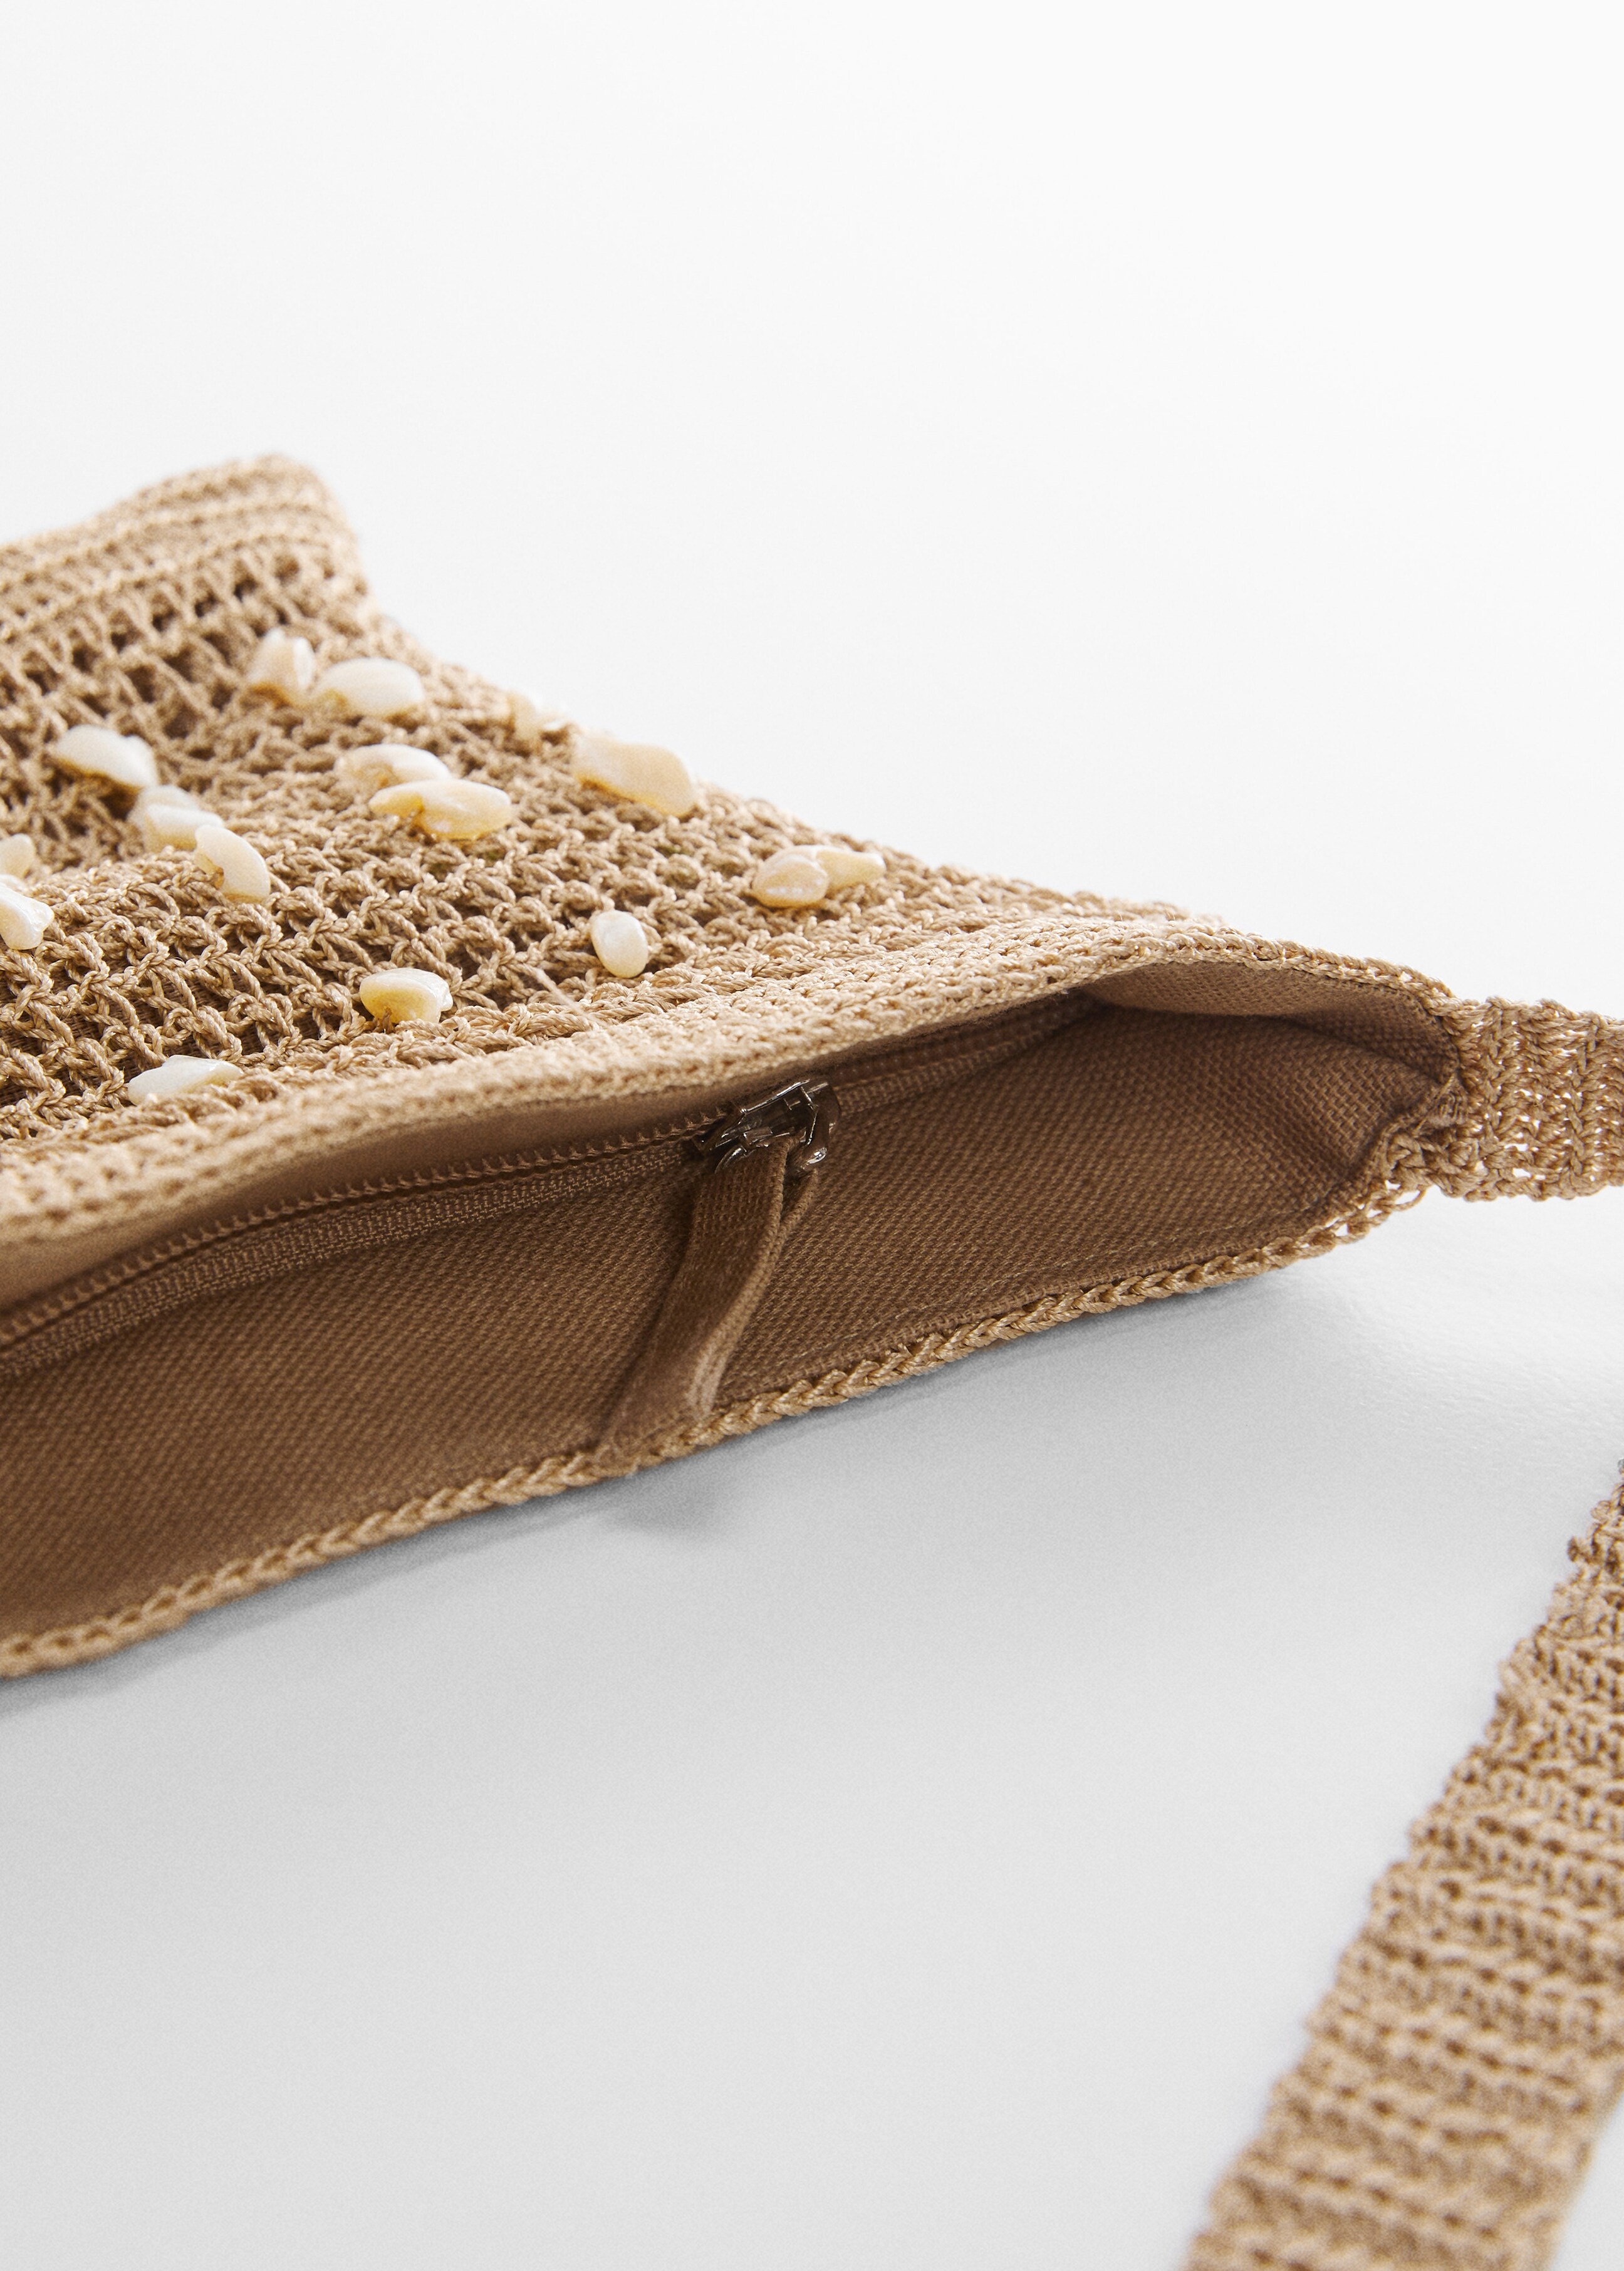 Crochet bag with shell detail - Details of the article 2